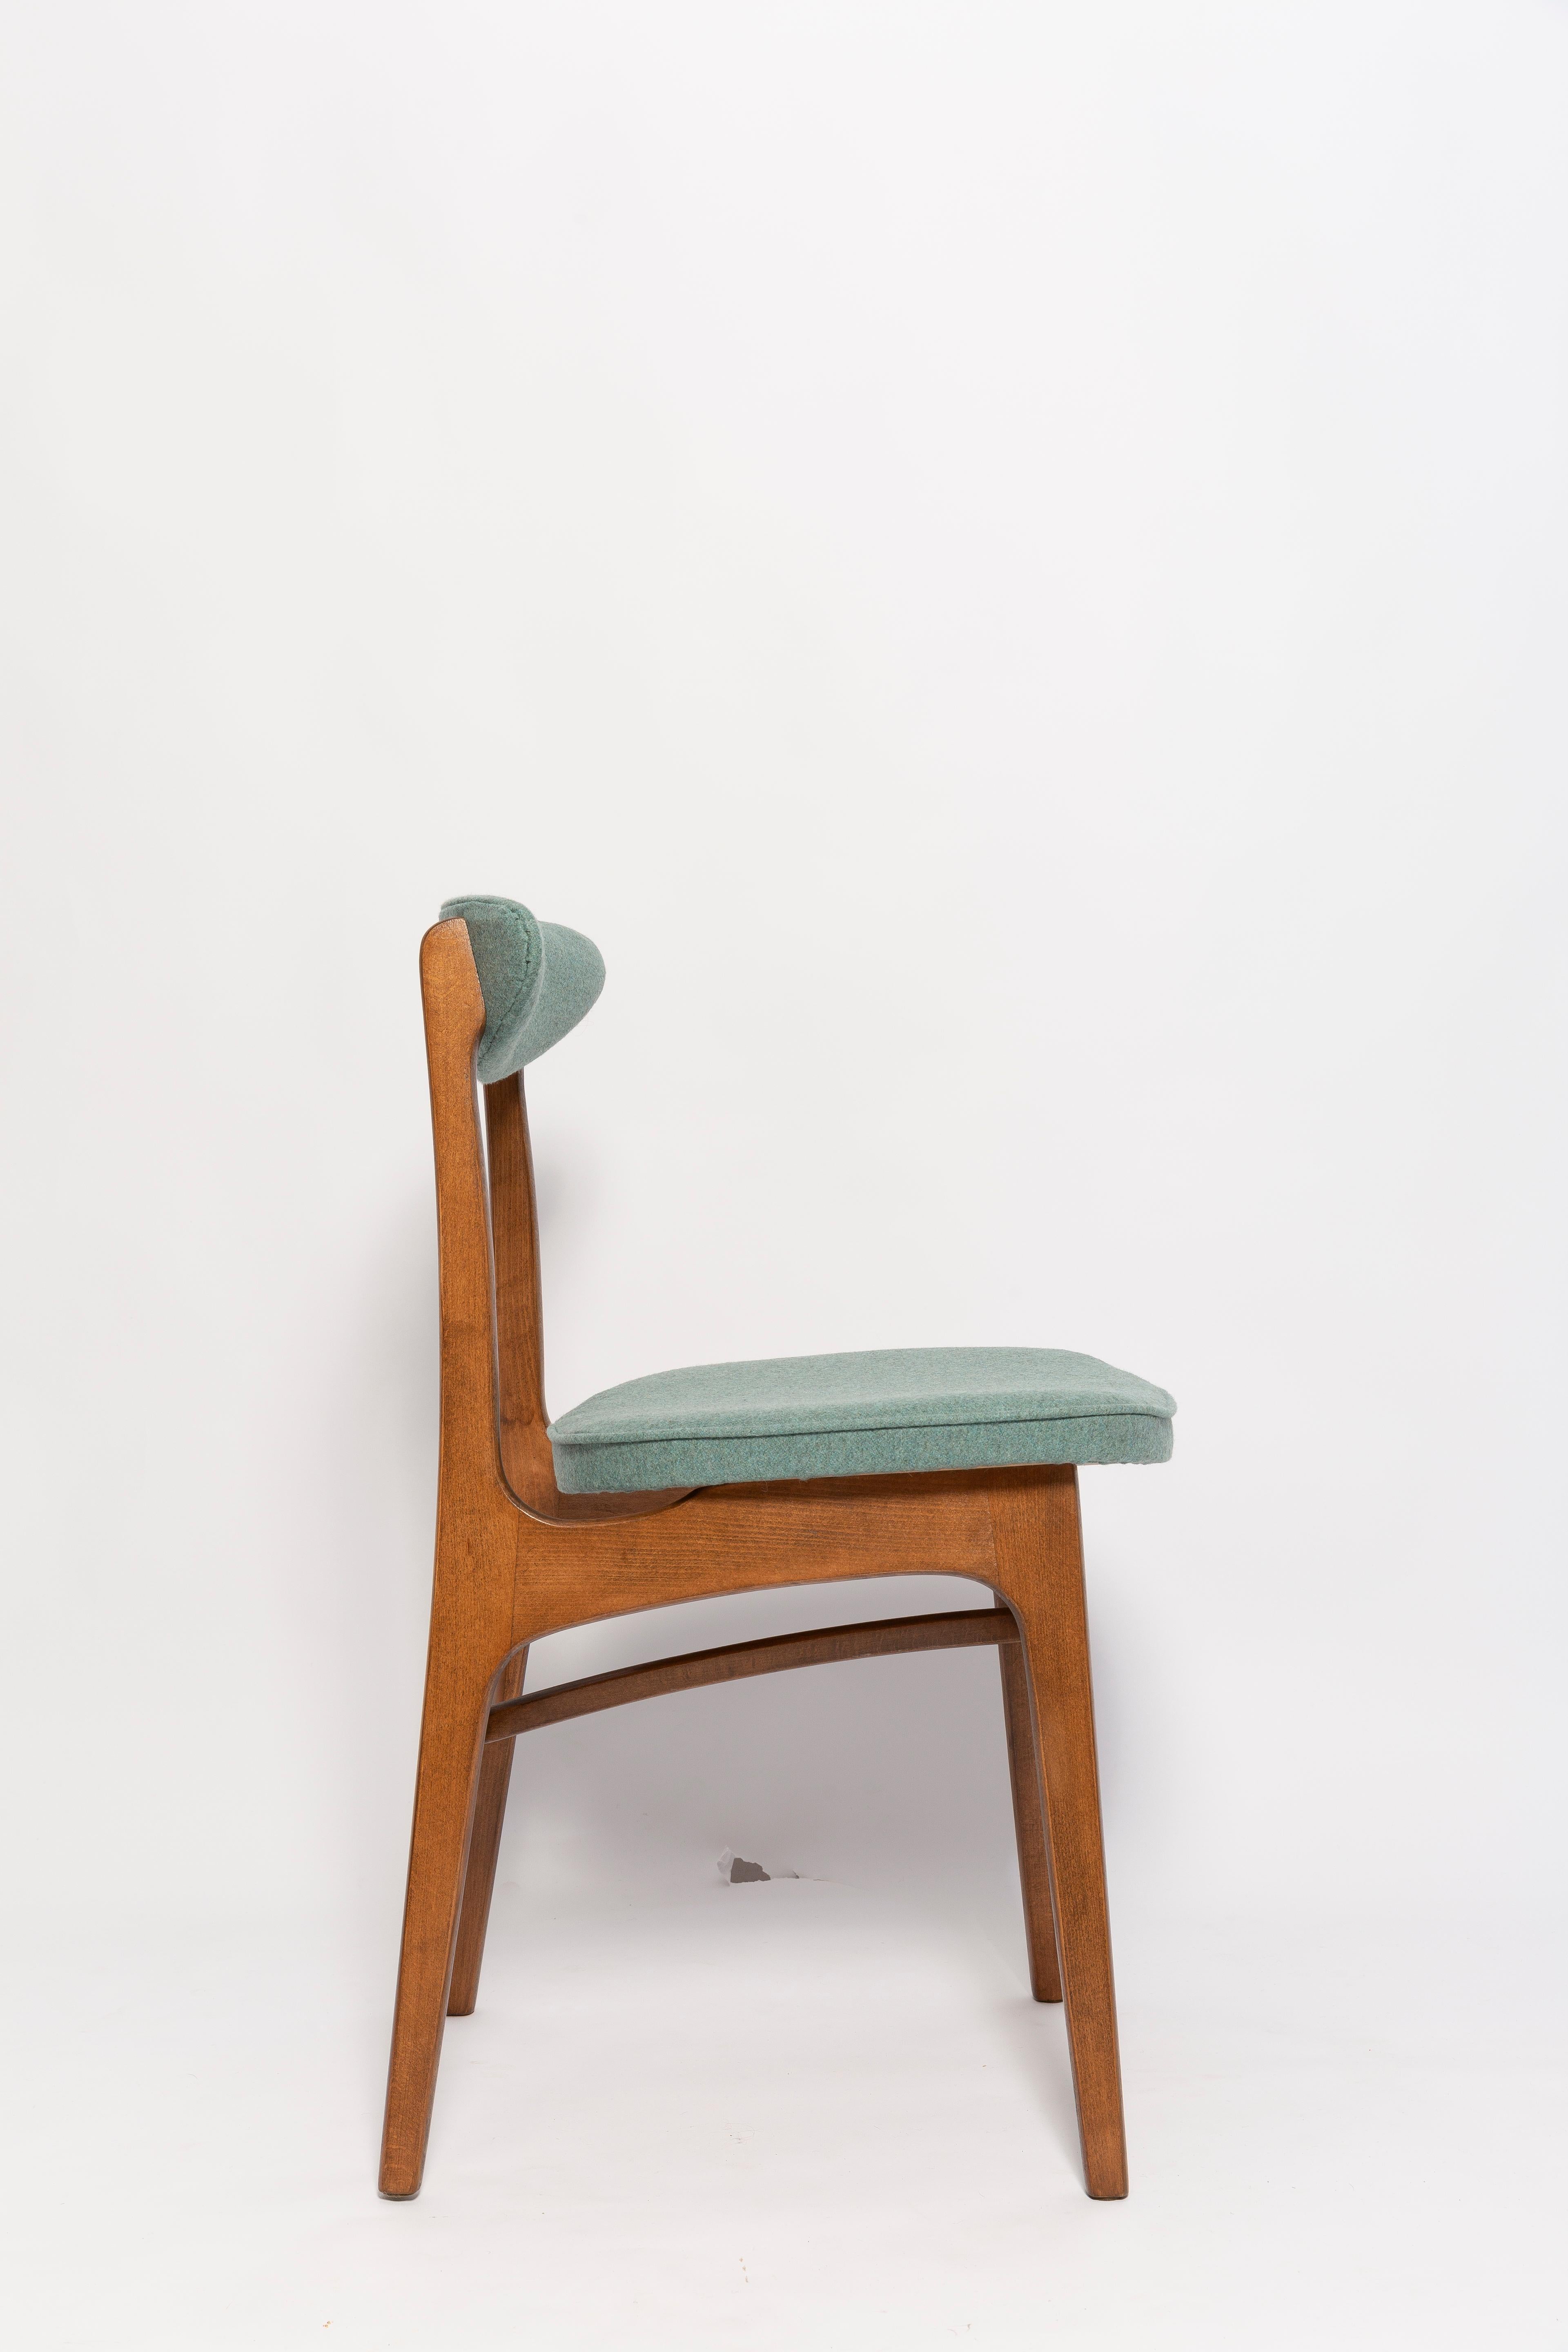 Hand-Crafted Set of Eight Mid Century Green Wool Chairs, Rajmund Halas, Europe, 1960s For Sale